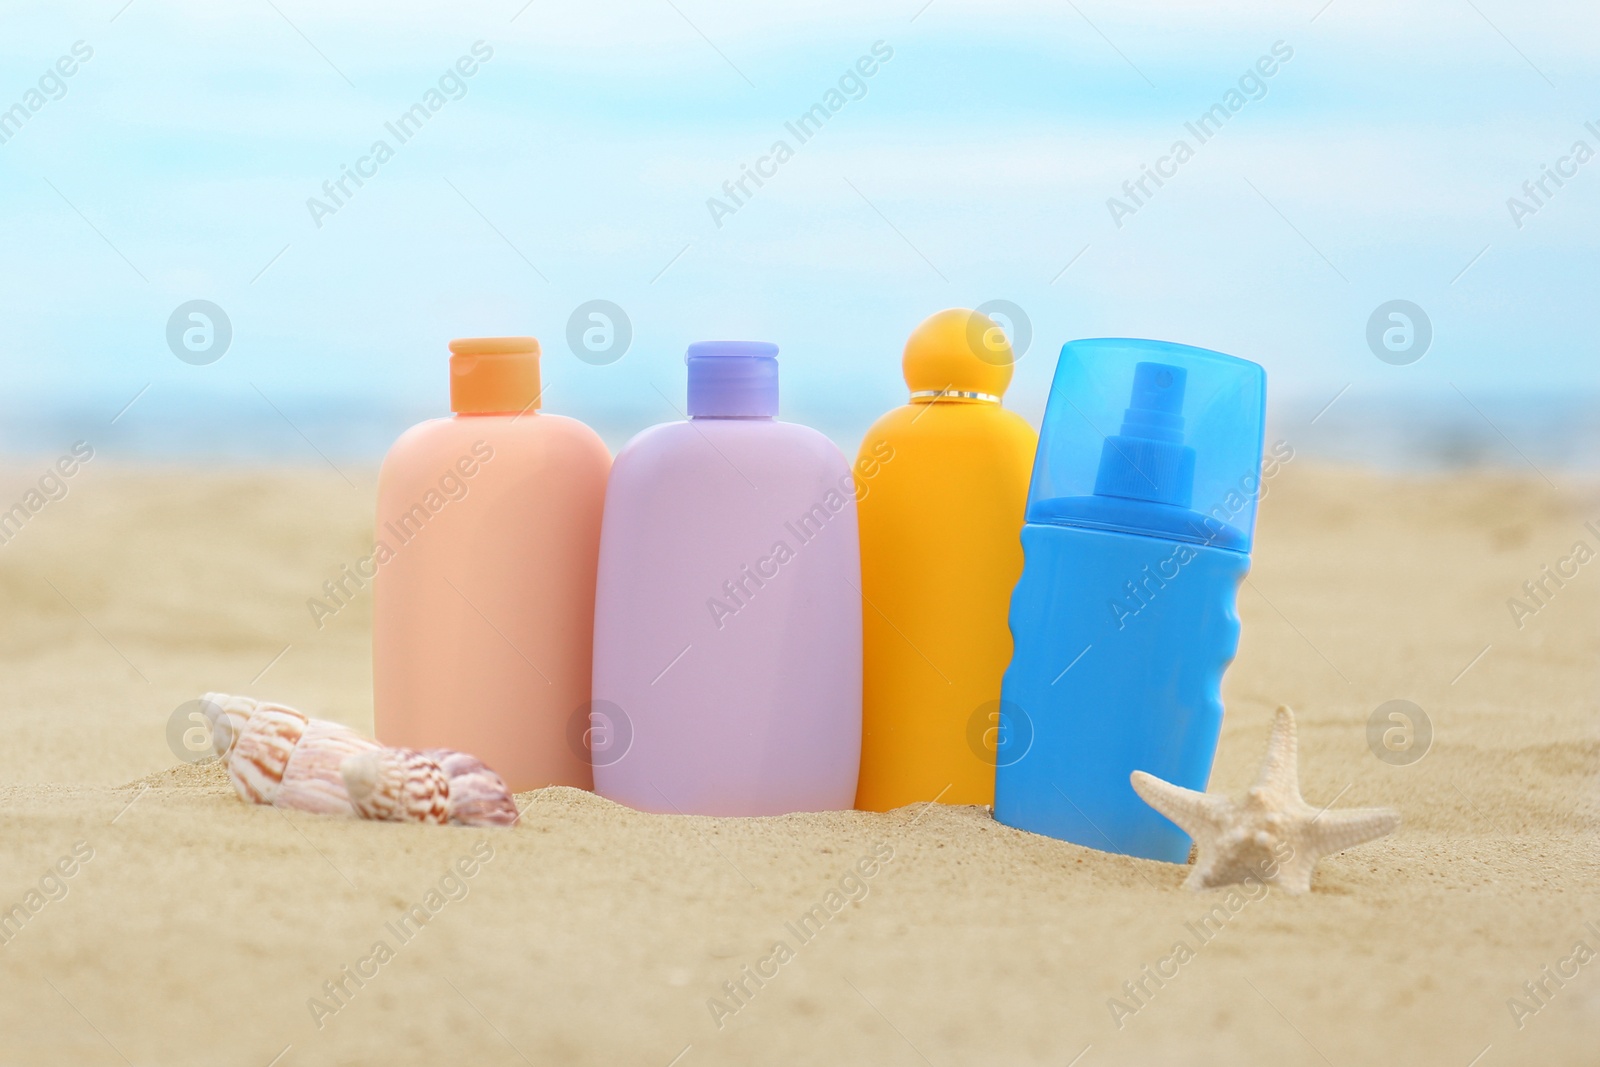 Photo of Different bottles with sun protection creams and seashells on sandy beach near sea